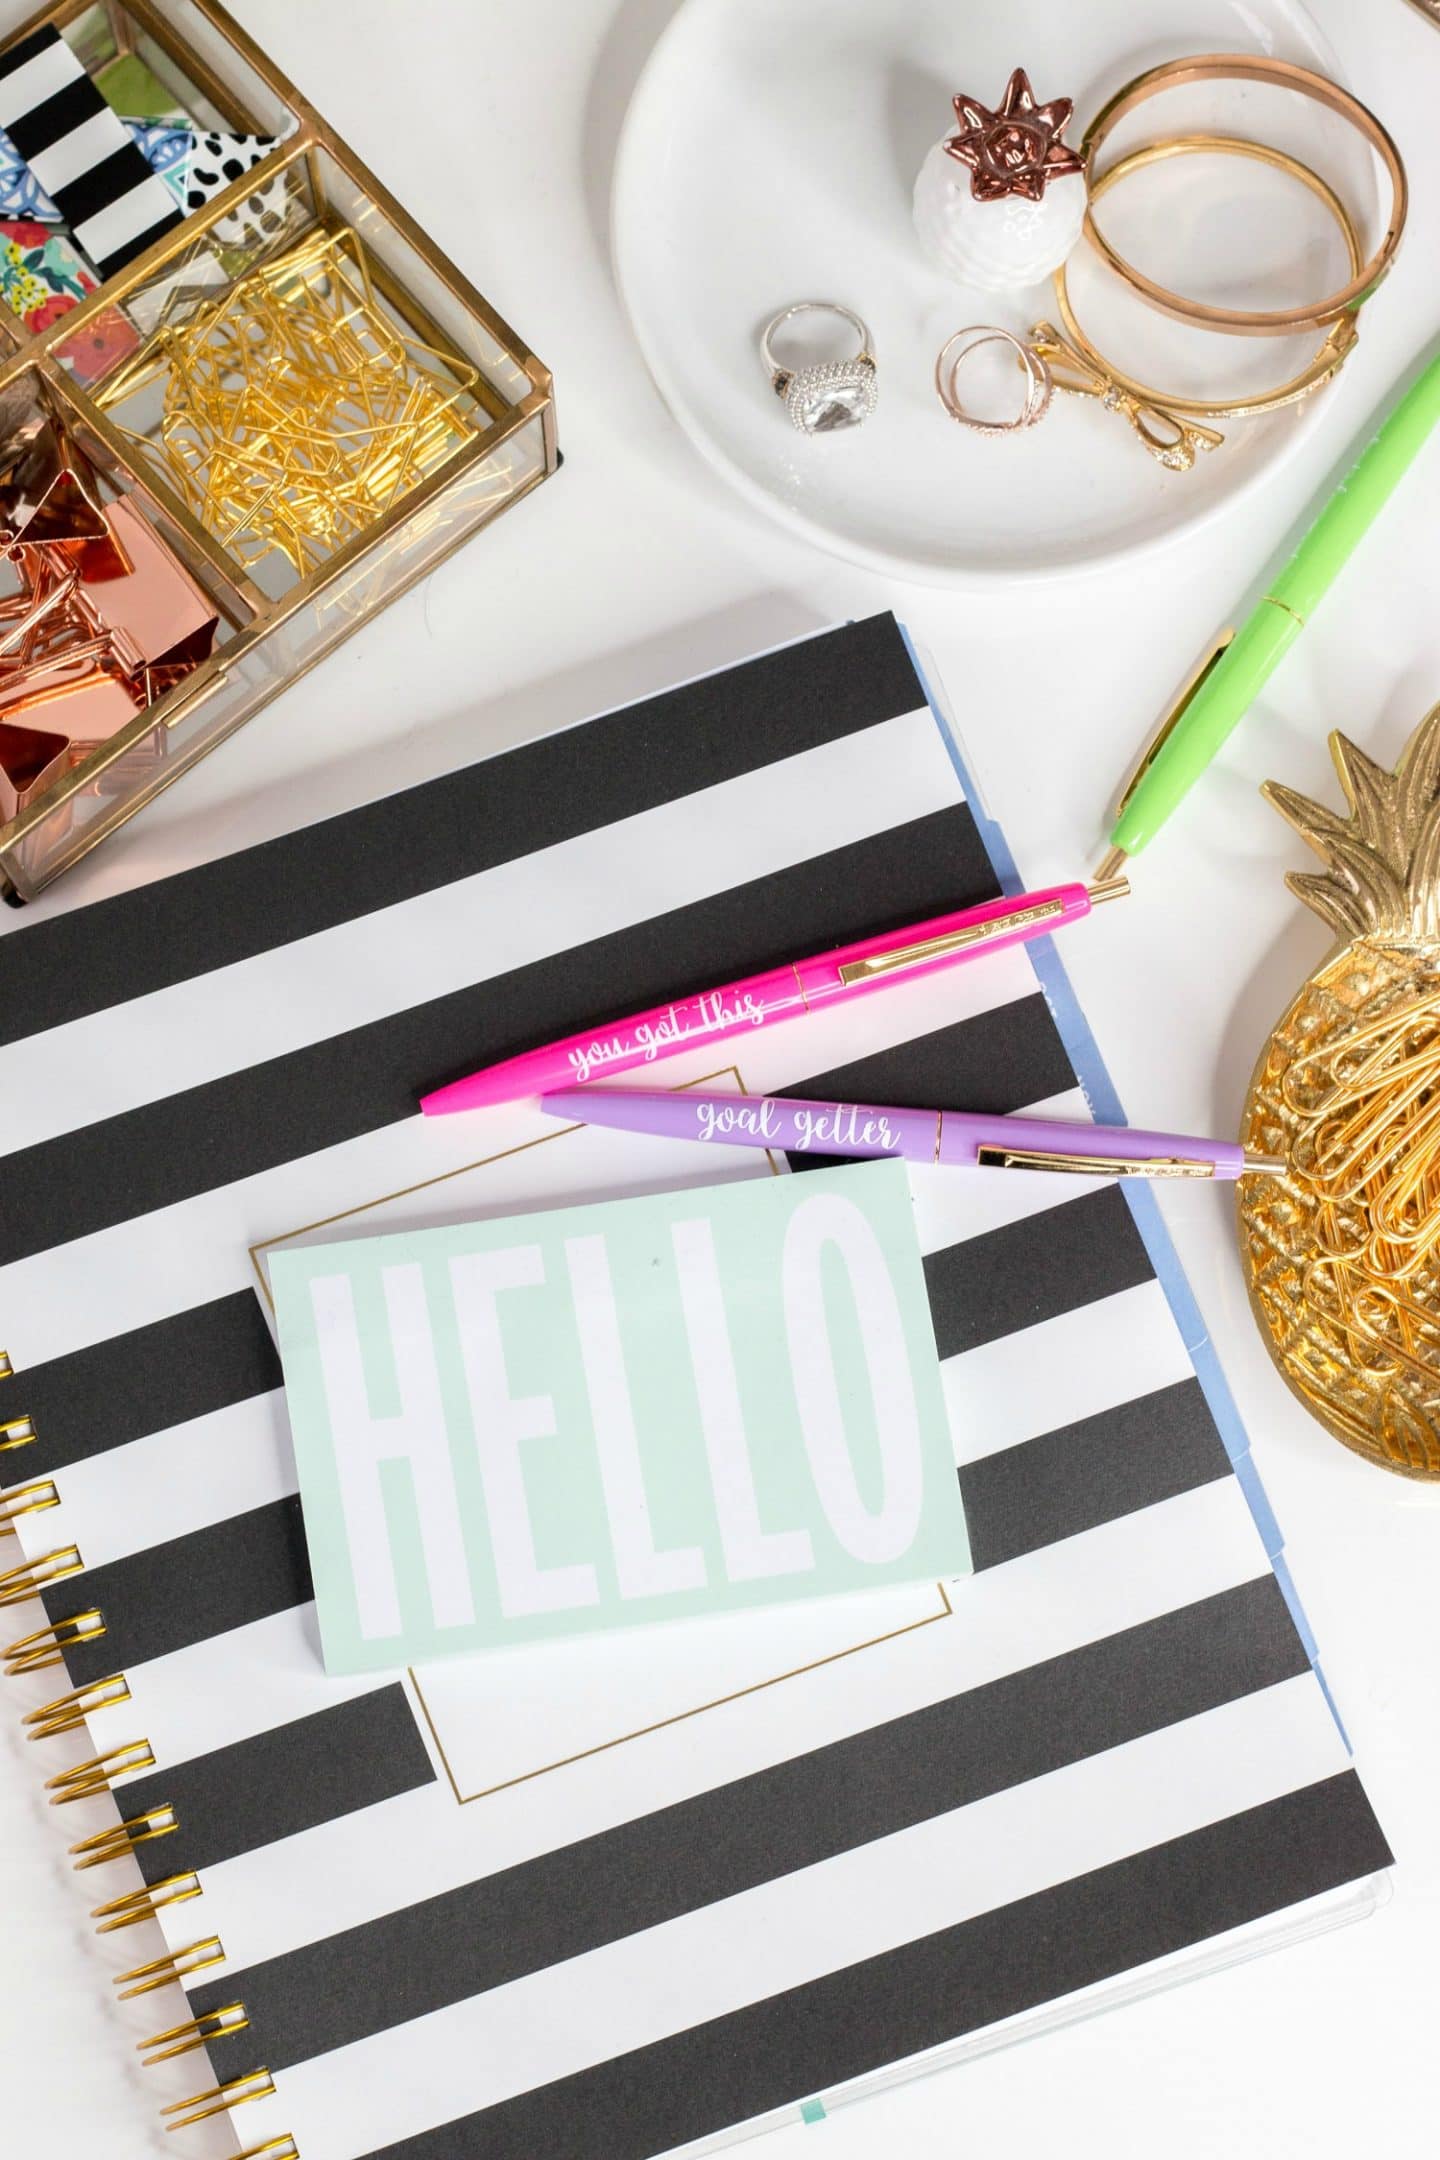 cute office supplies and special k nourish bars and stationery goal getter game plan from blogger Ashley Brooke Nicholas